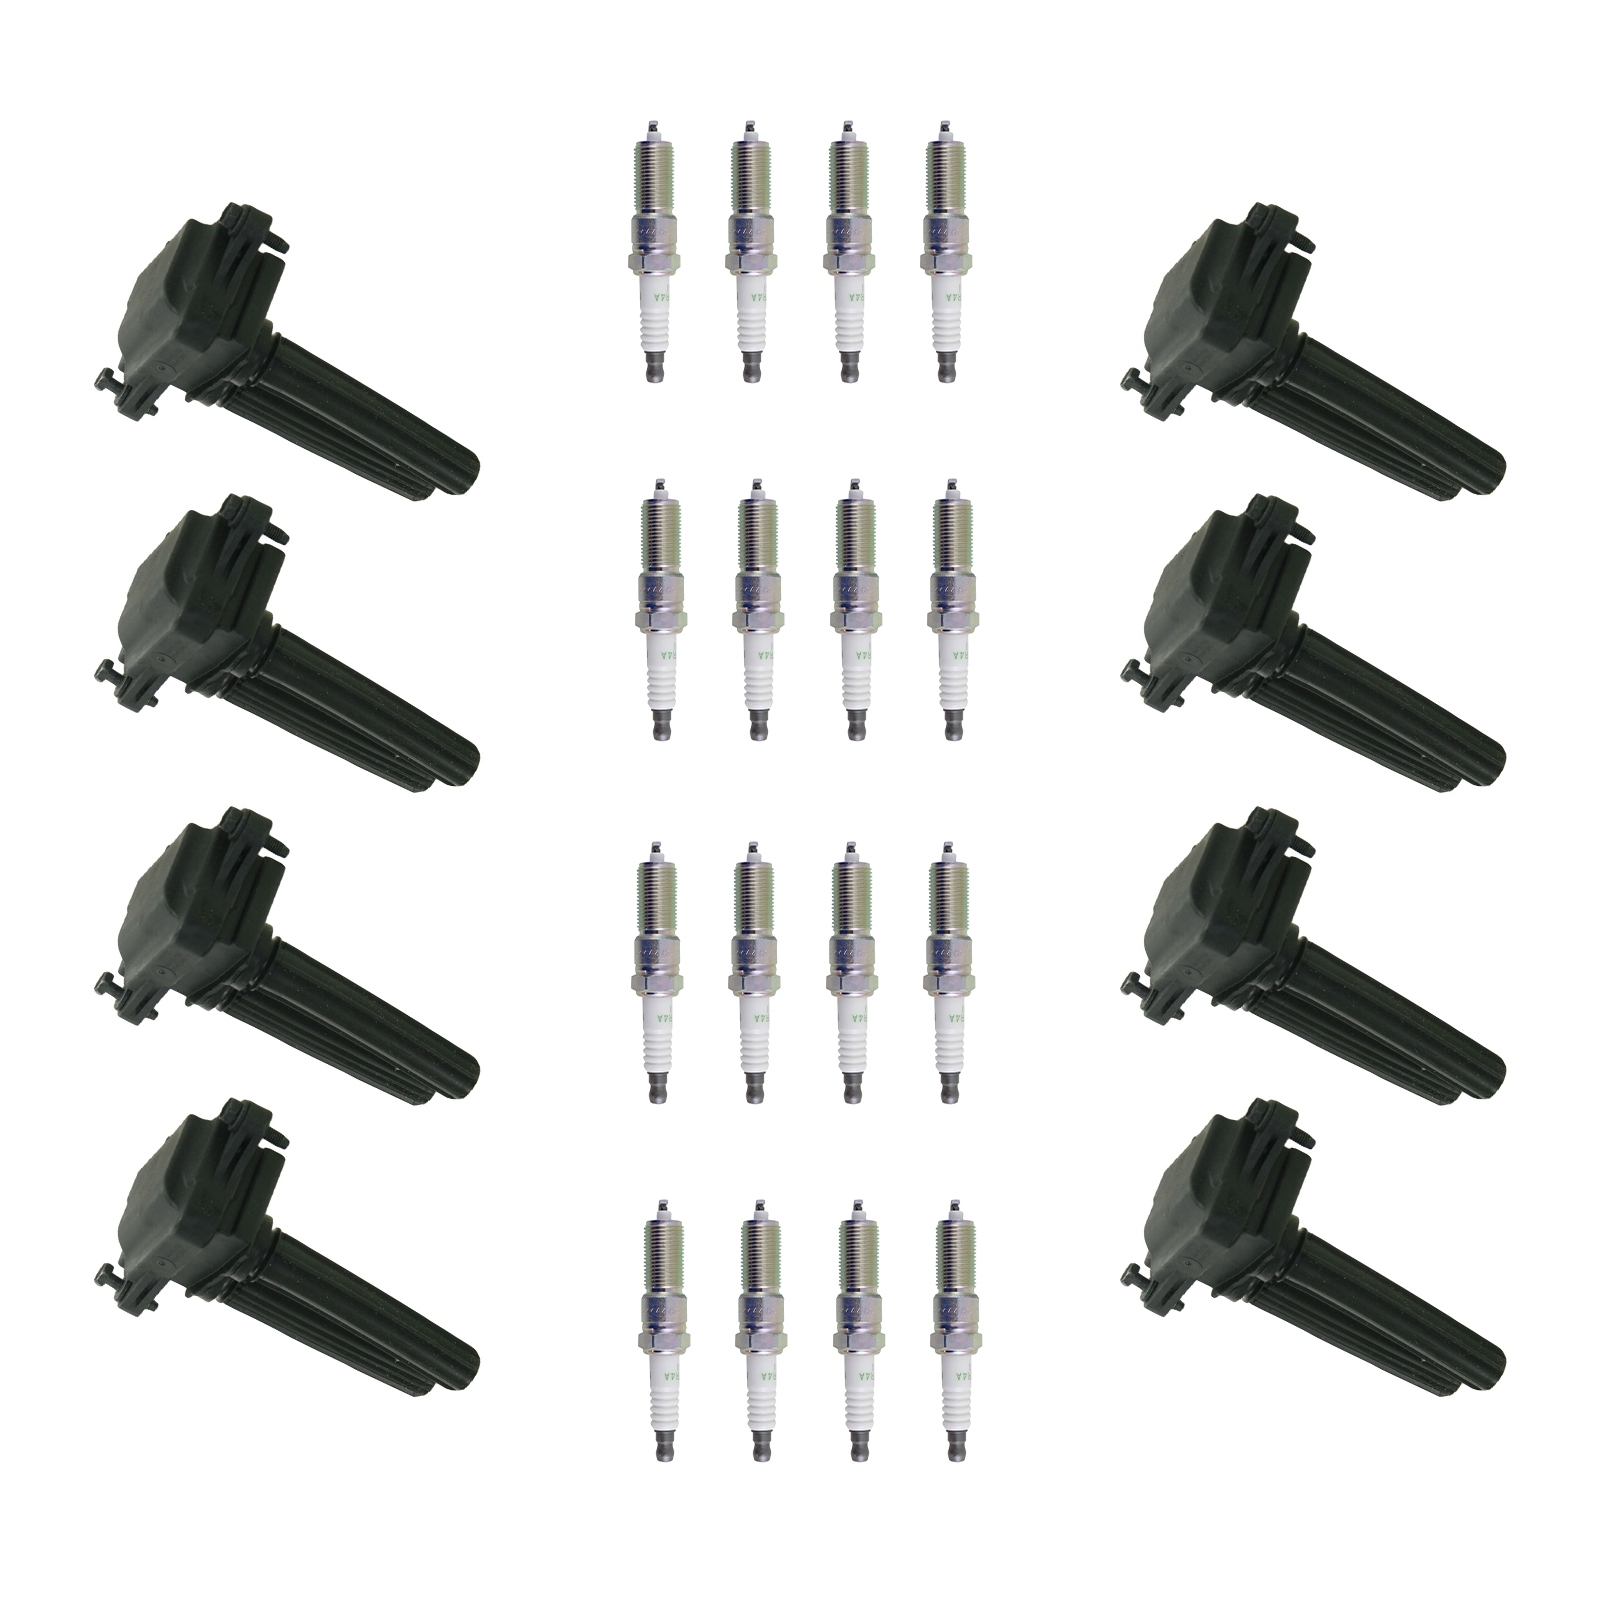 Diy Solutions 24 Piece Ignition Kit For 06-08 Grand Cherokee 06-08 Commander, HWNV-IGN01278